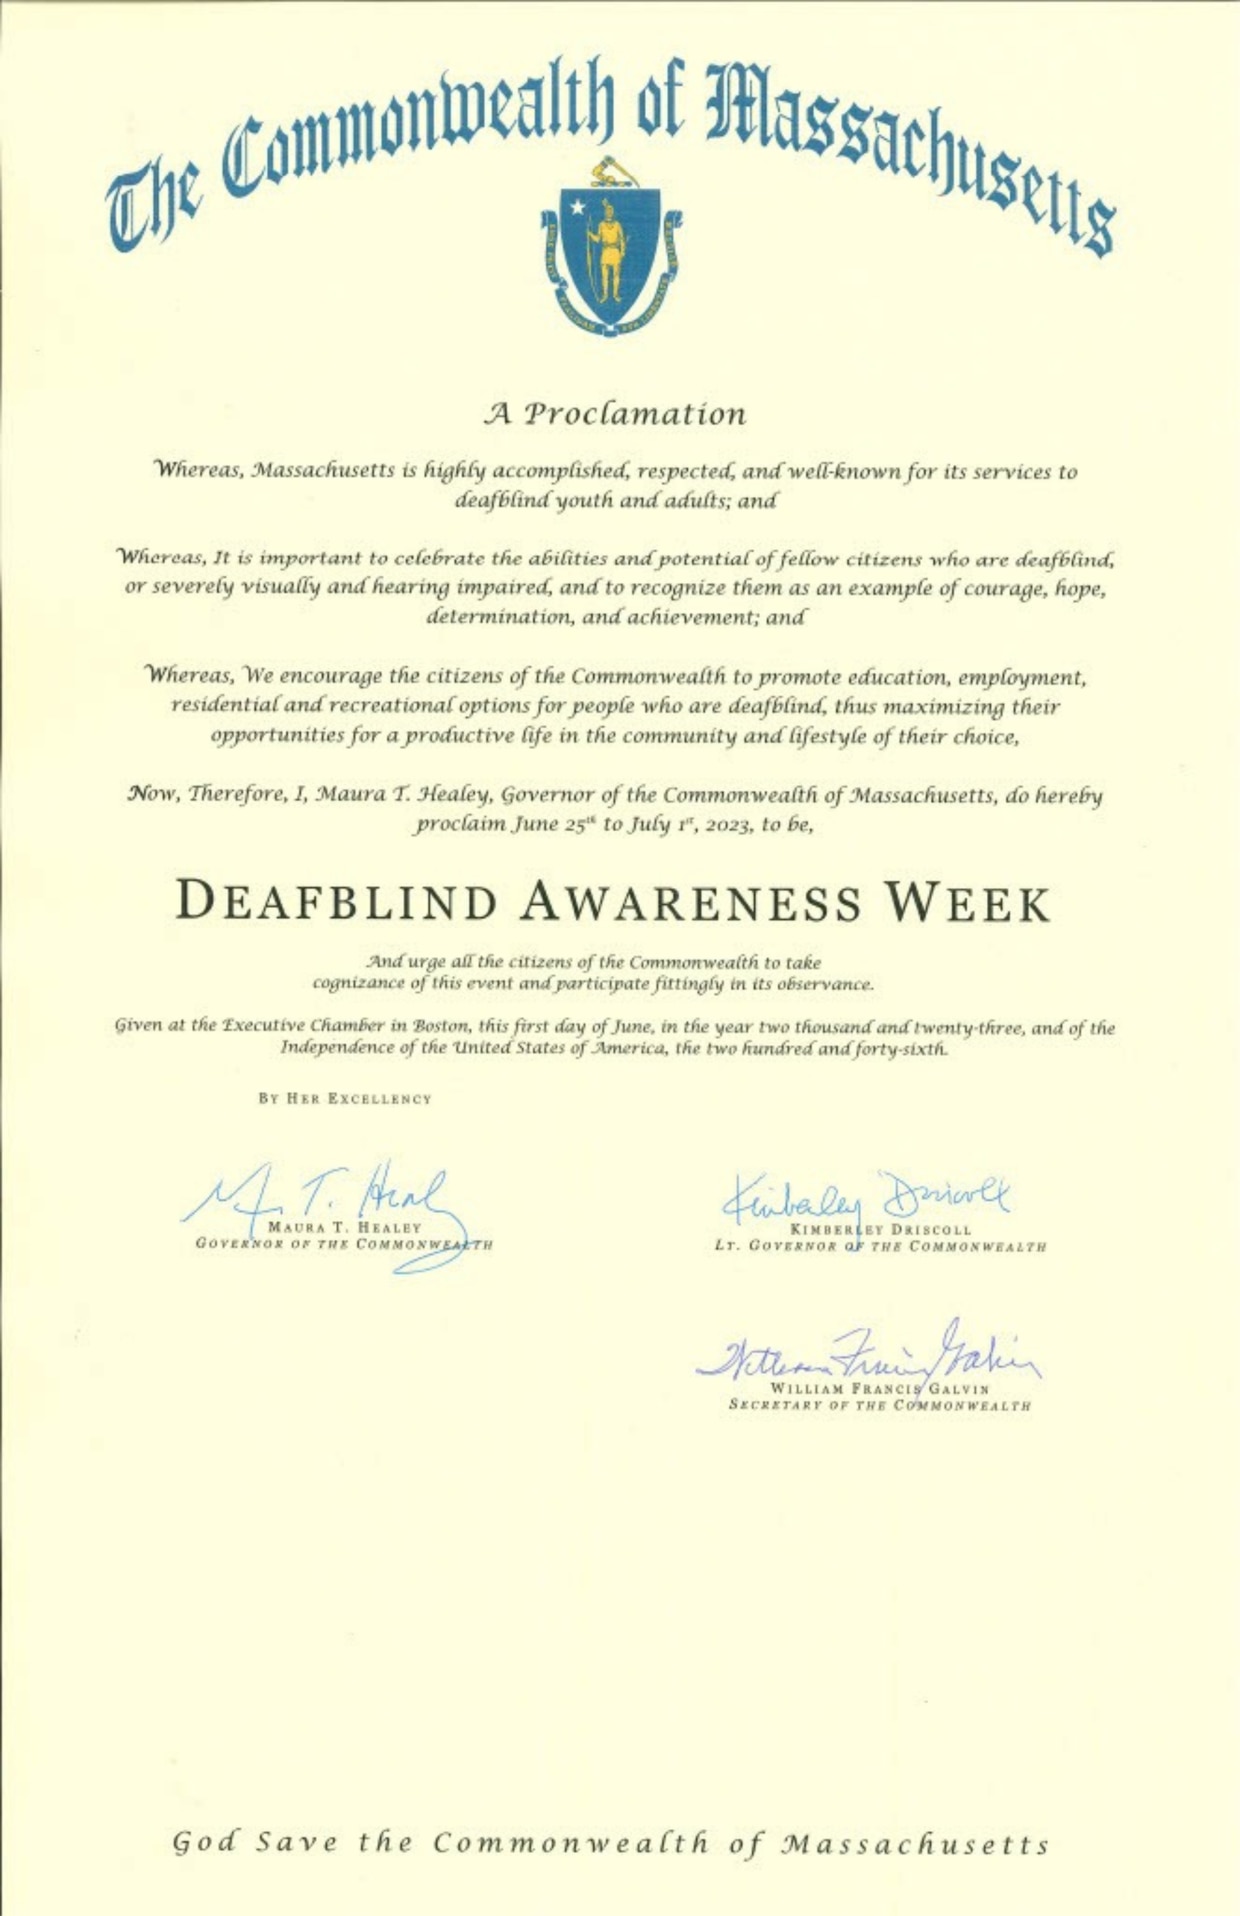 A photo of the DeafBlind Awareness Week Proclamation signed by Governor Healey, Lt. Governor Driscoll, and Secretary of the Commonwealth Galvin 